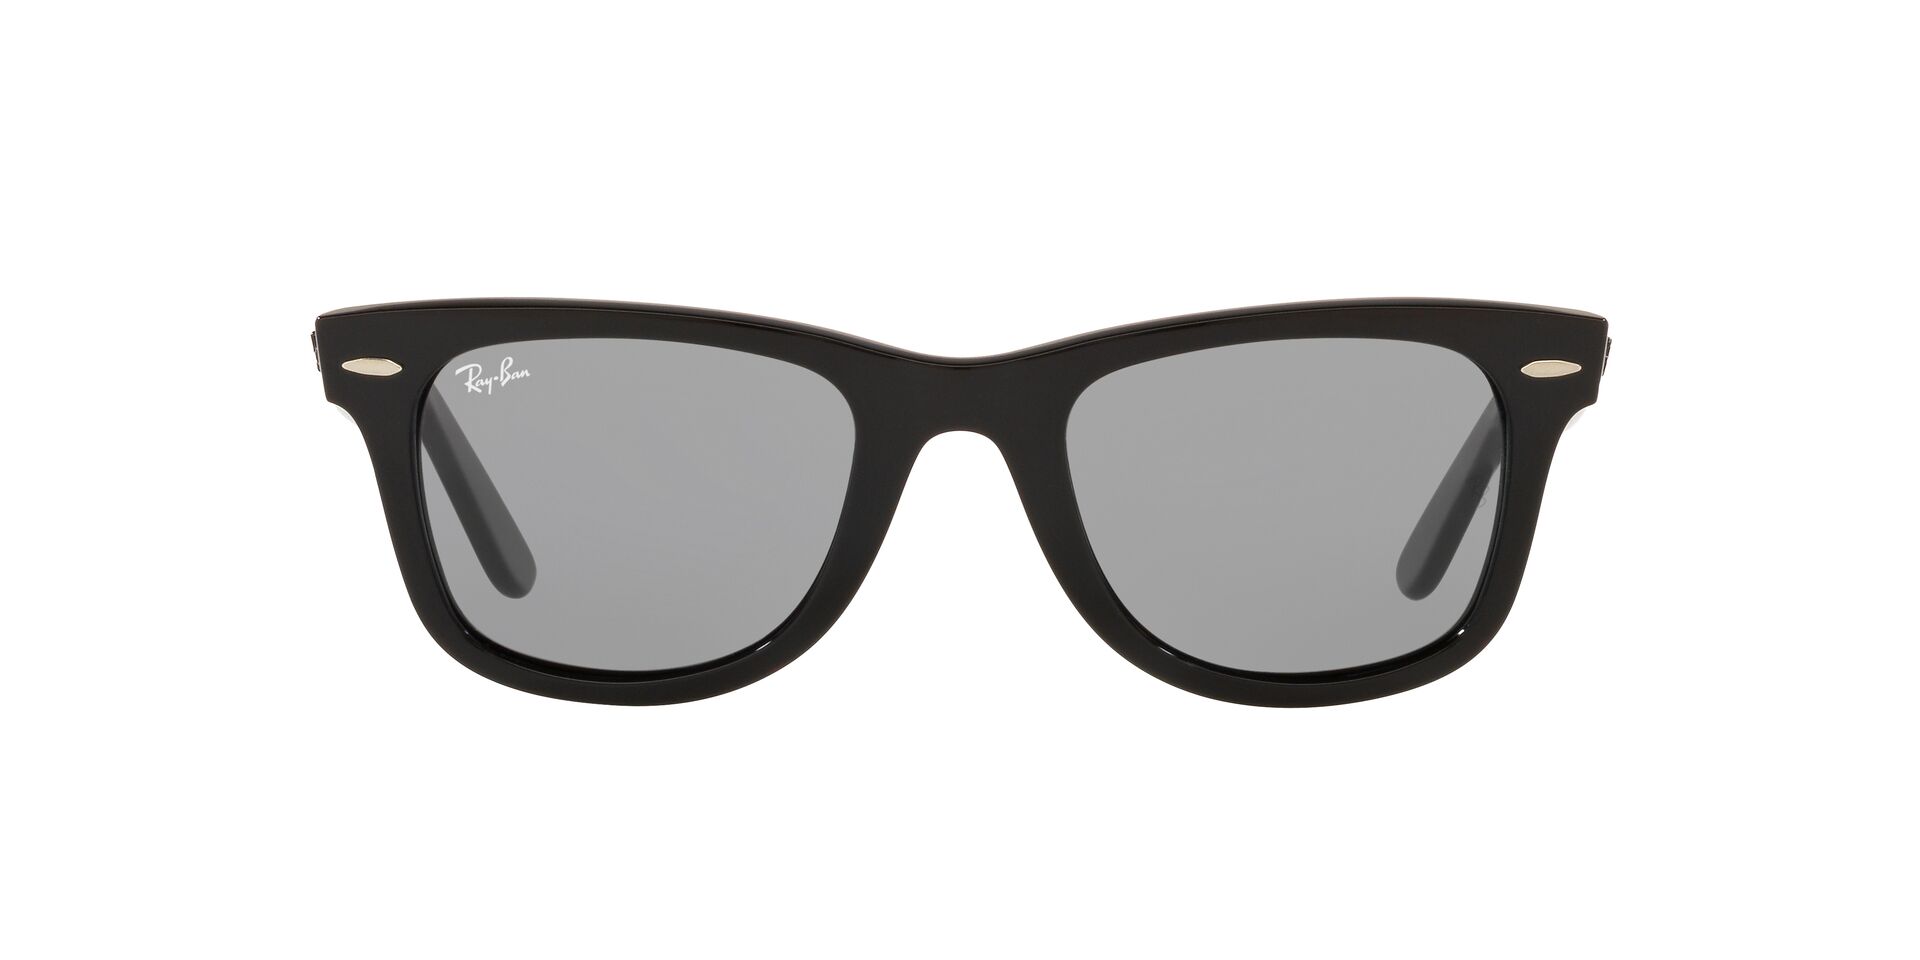 ray-ban-sonnenbrille-RB2140-6495R5-optiker-gronde-augsburg-front